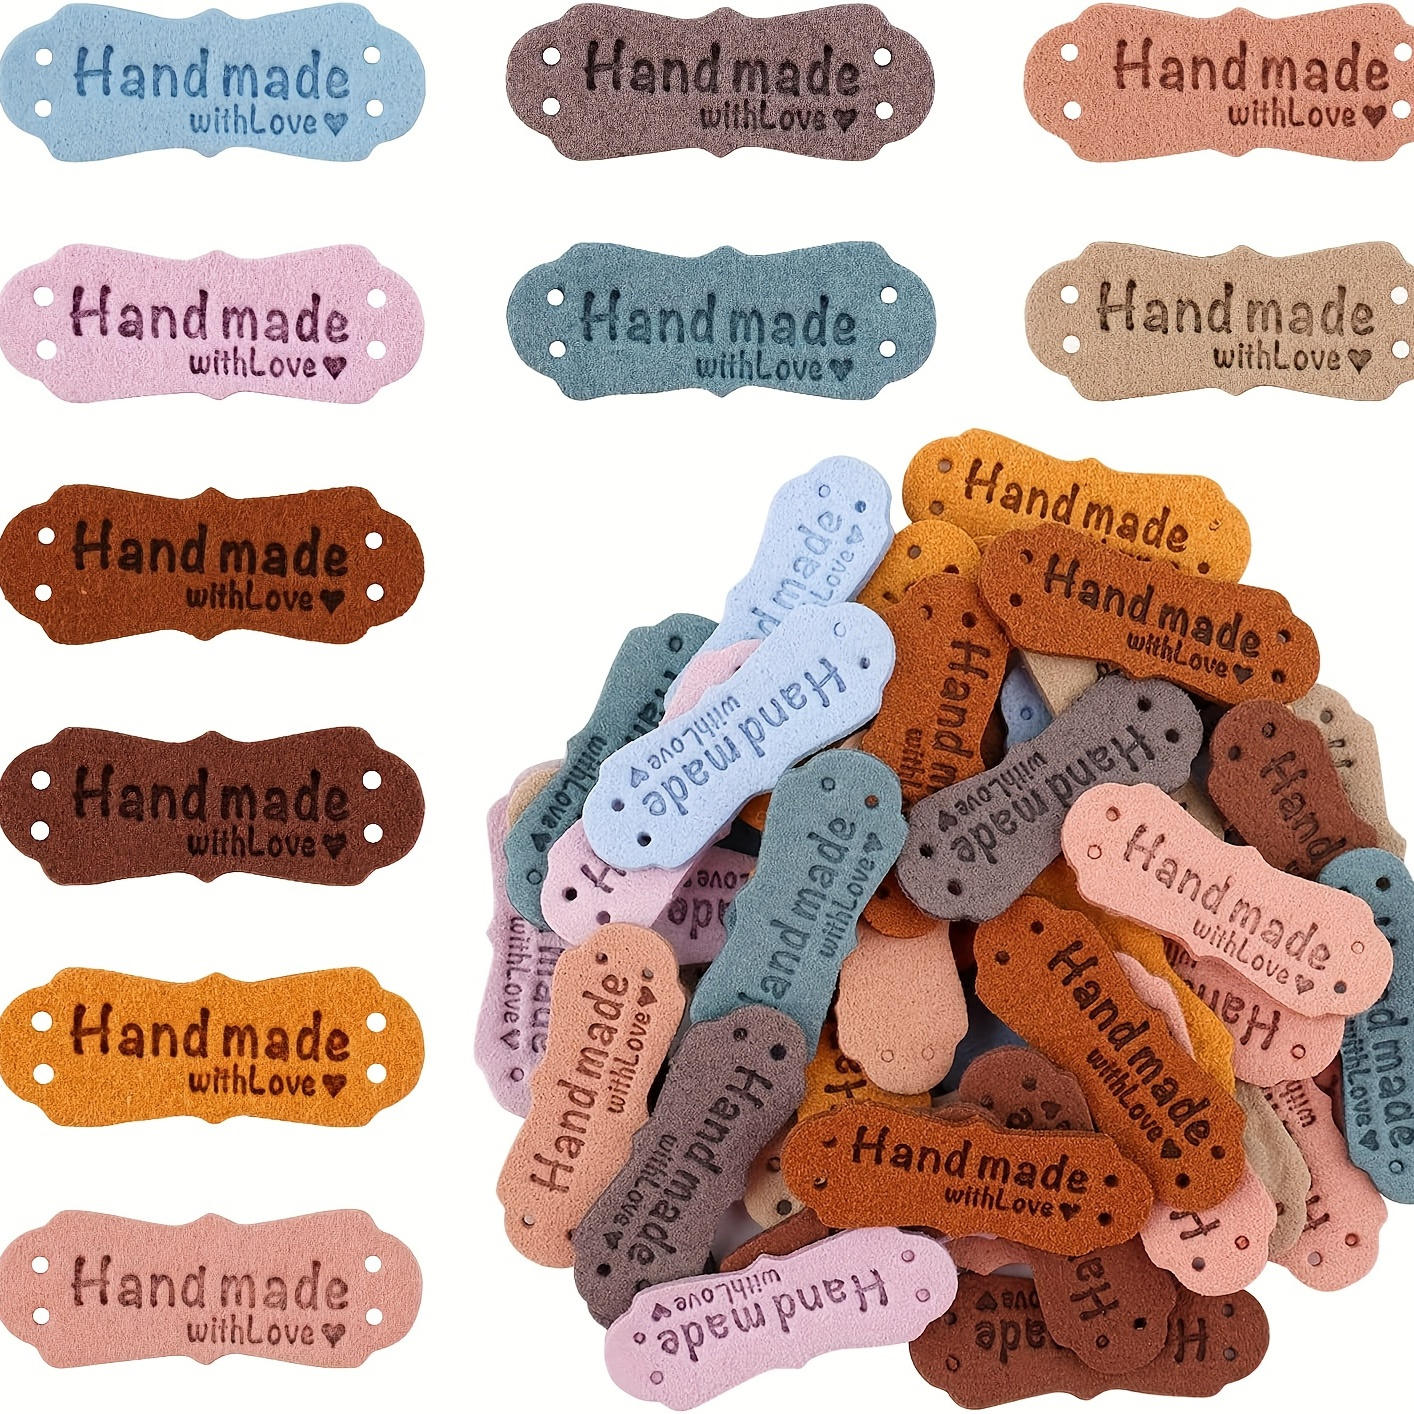 

10pcs Handmade Leather Labels With Love Embossed, Microfiber Color Tags For Knitting, Crochet, Sewing, Hats, Purses & Clothing Crafts - Assorted Colors